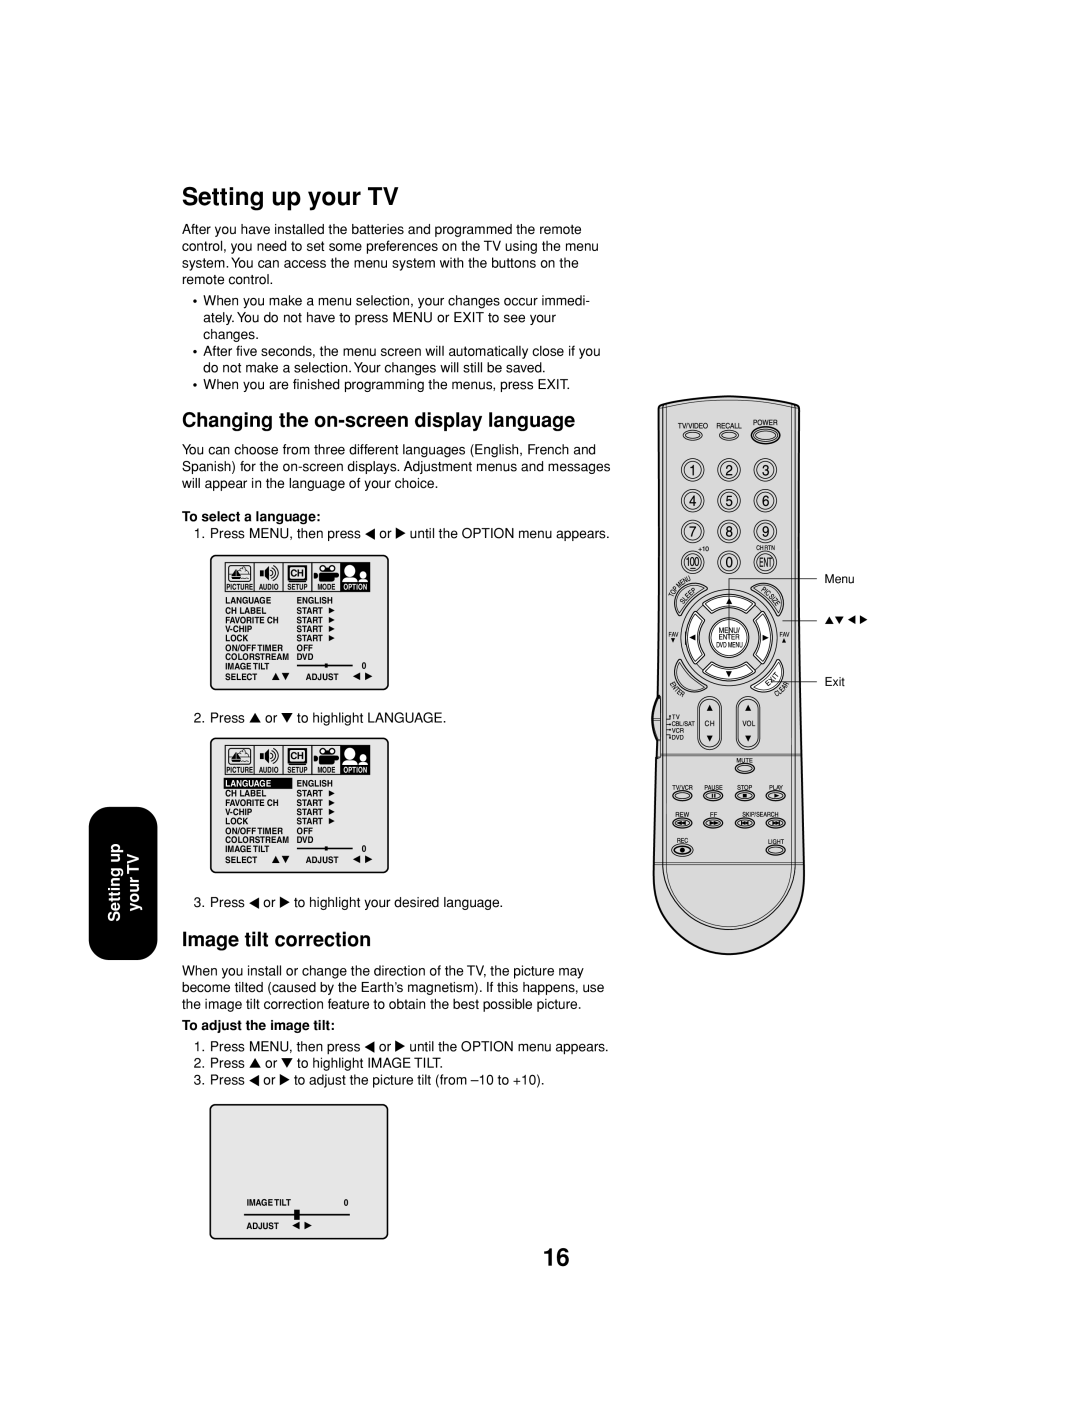 Toshiba 27AF53 appendix Setting up your TV, Changing the on-screen display language, Image tilt correction 